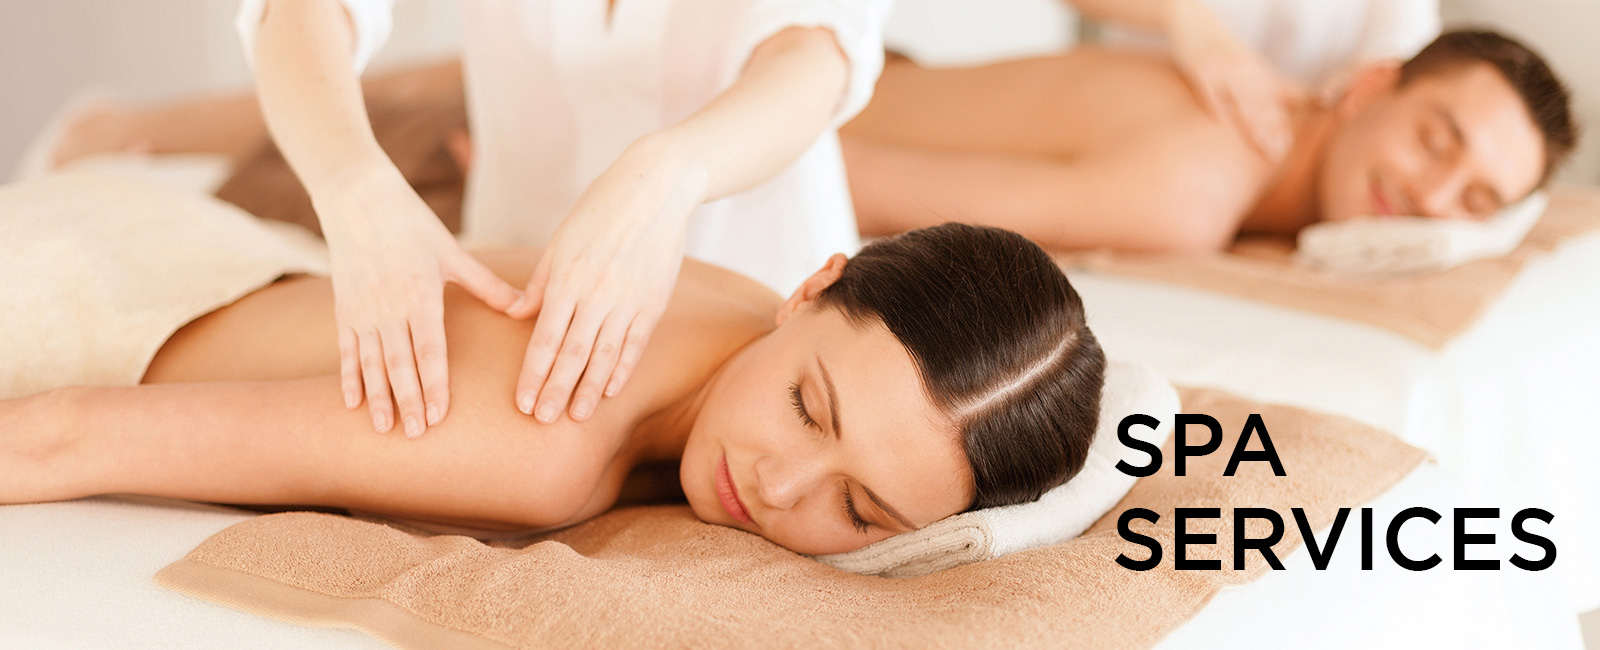 Check Out Different Consideration Before Taking Spa Services